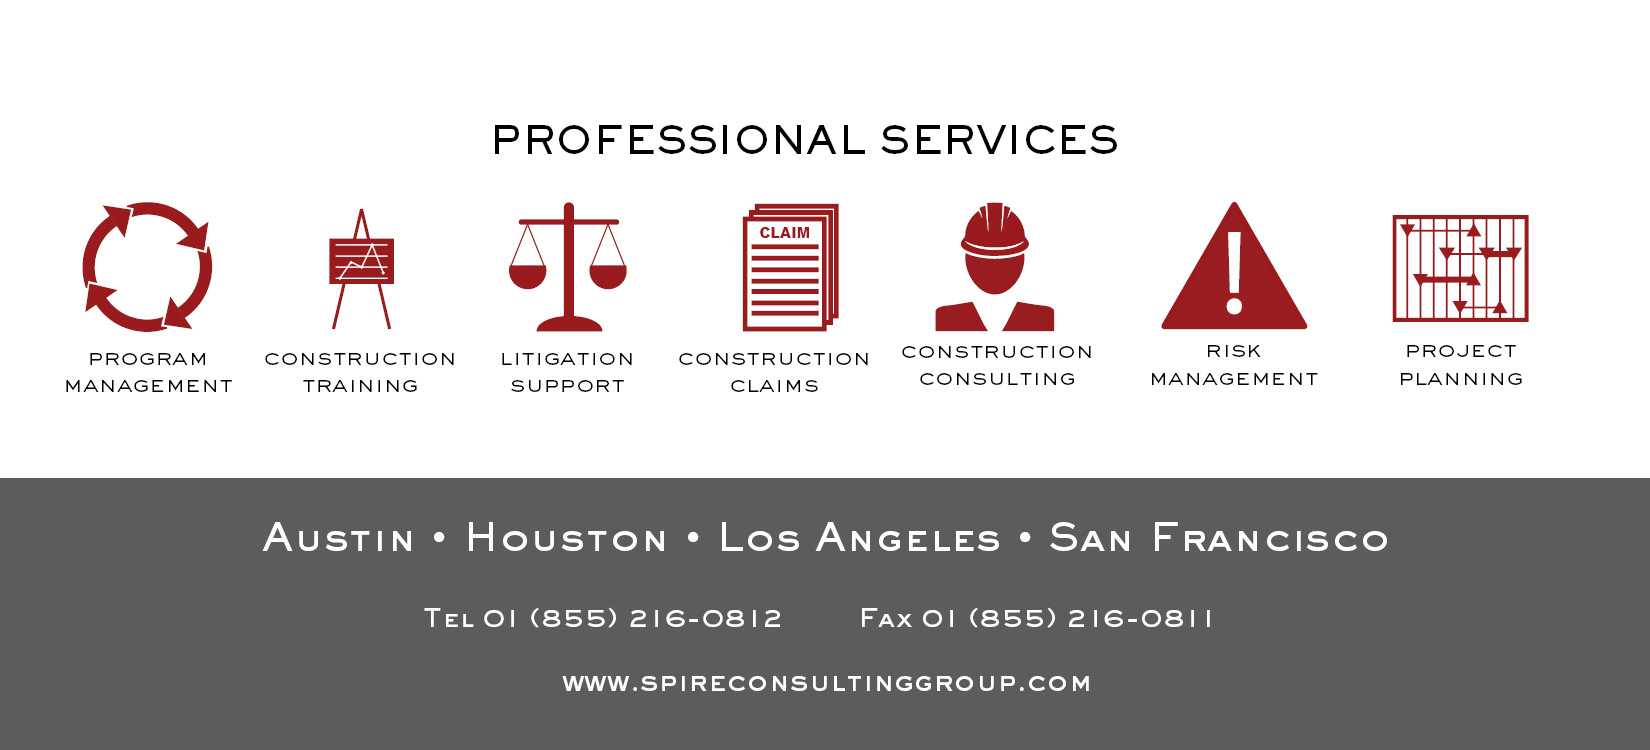 Learn more about Spire Consulting Group professional services